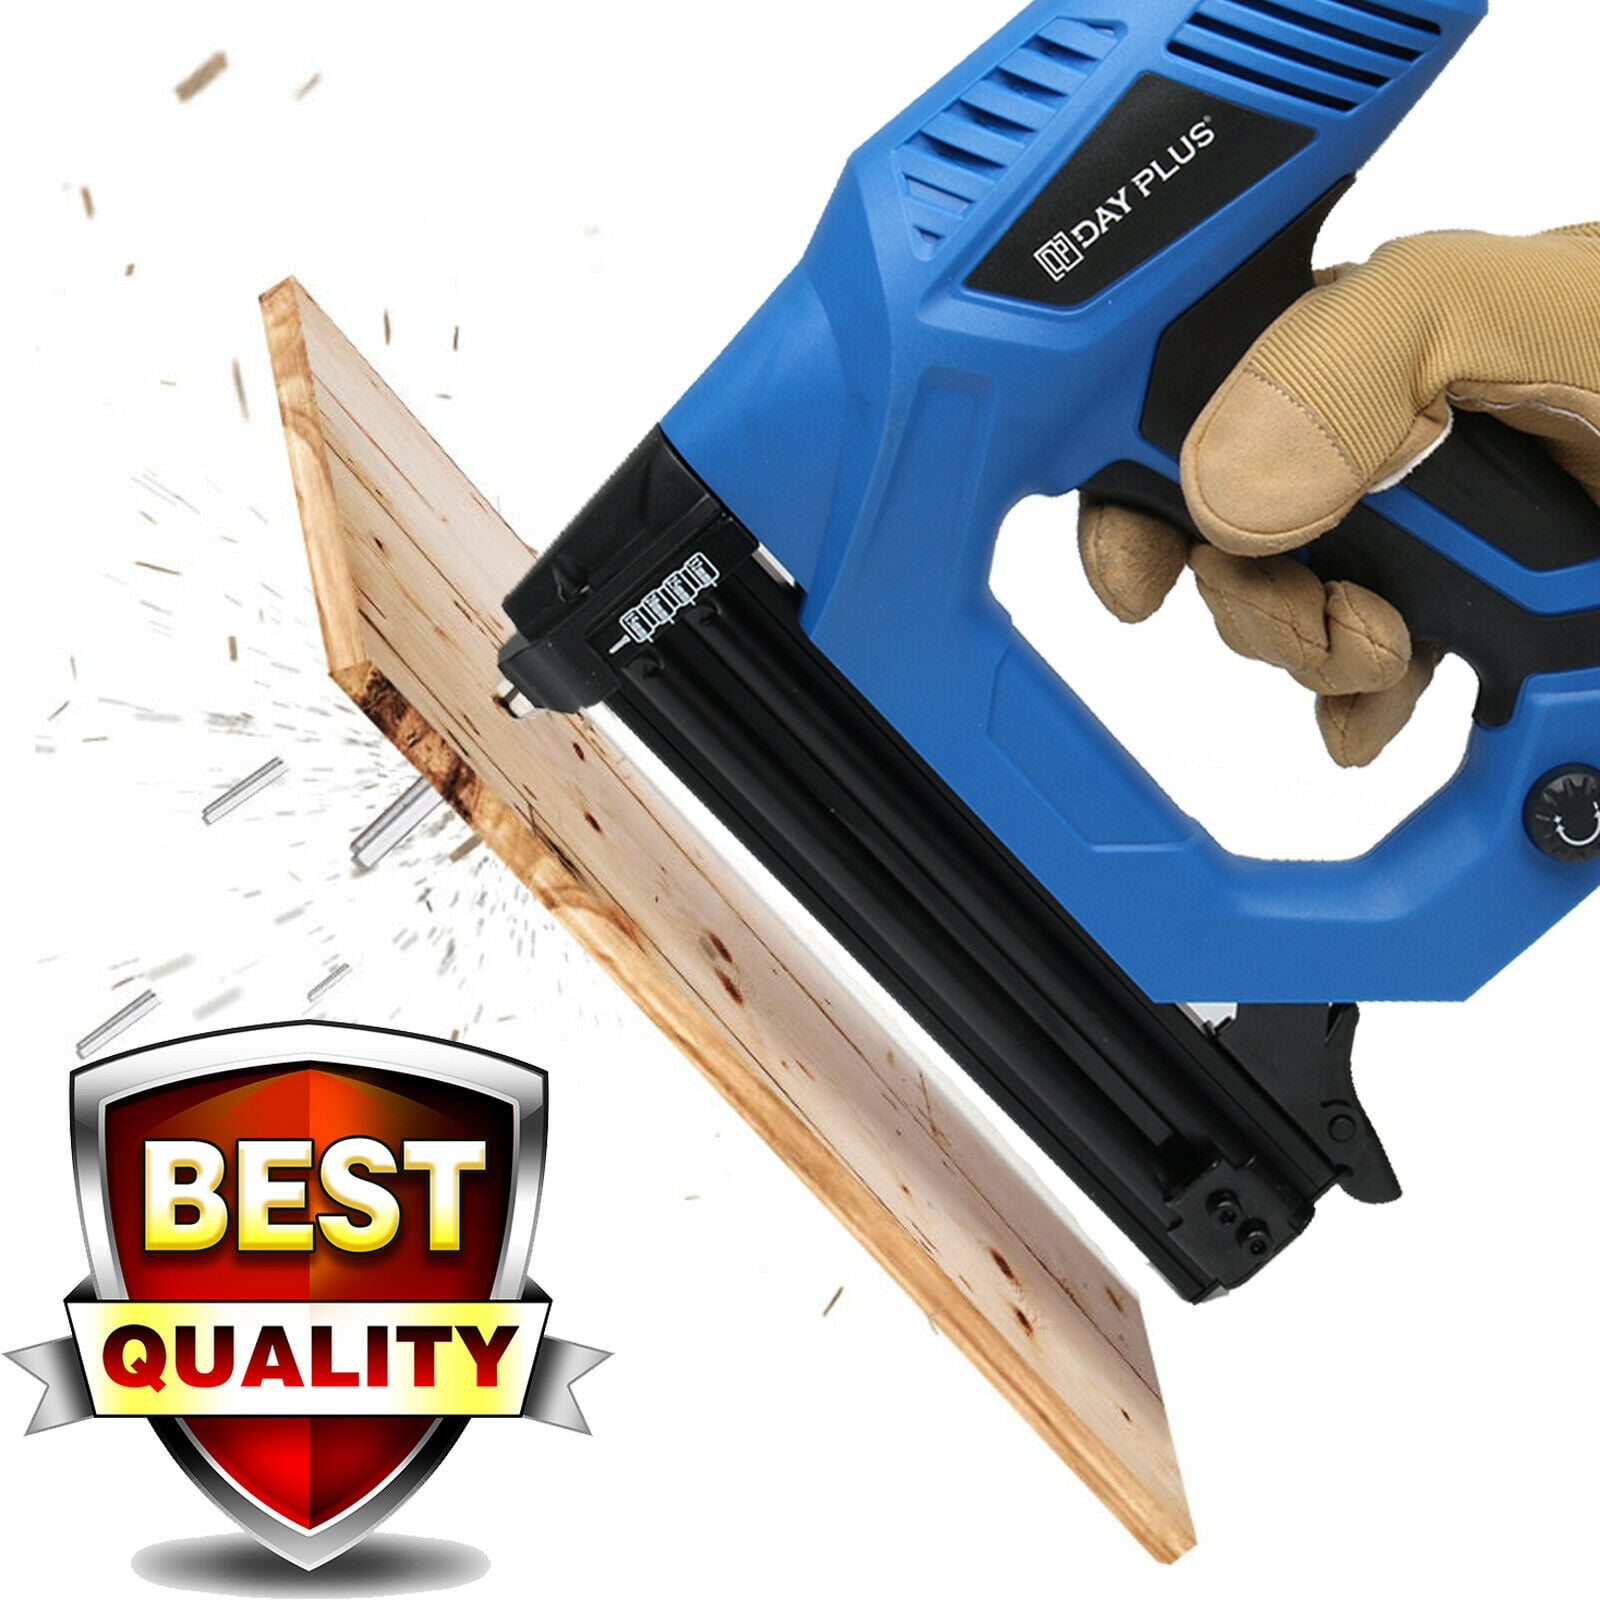 Details about   Electric Staple Gun framing Straight Nail Heavy Duty Stapler Woodworking Tools 